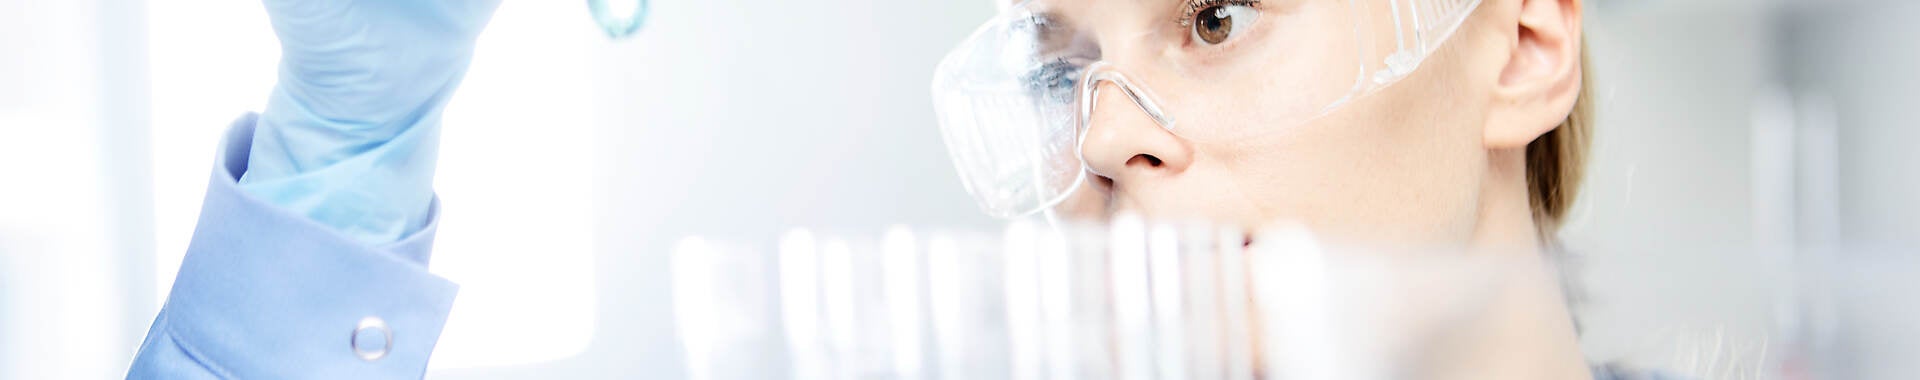 Woman looking at a test tube of solution in a lab